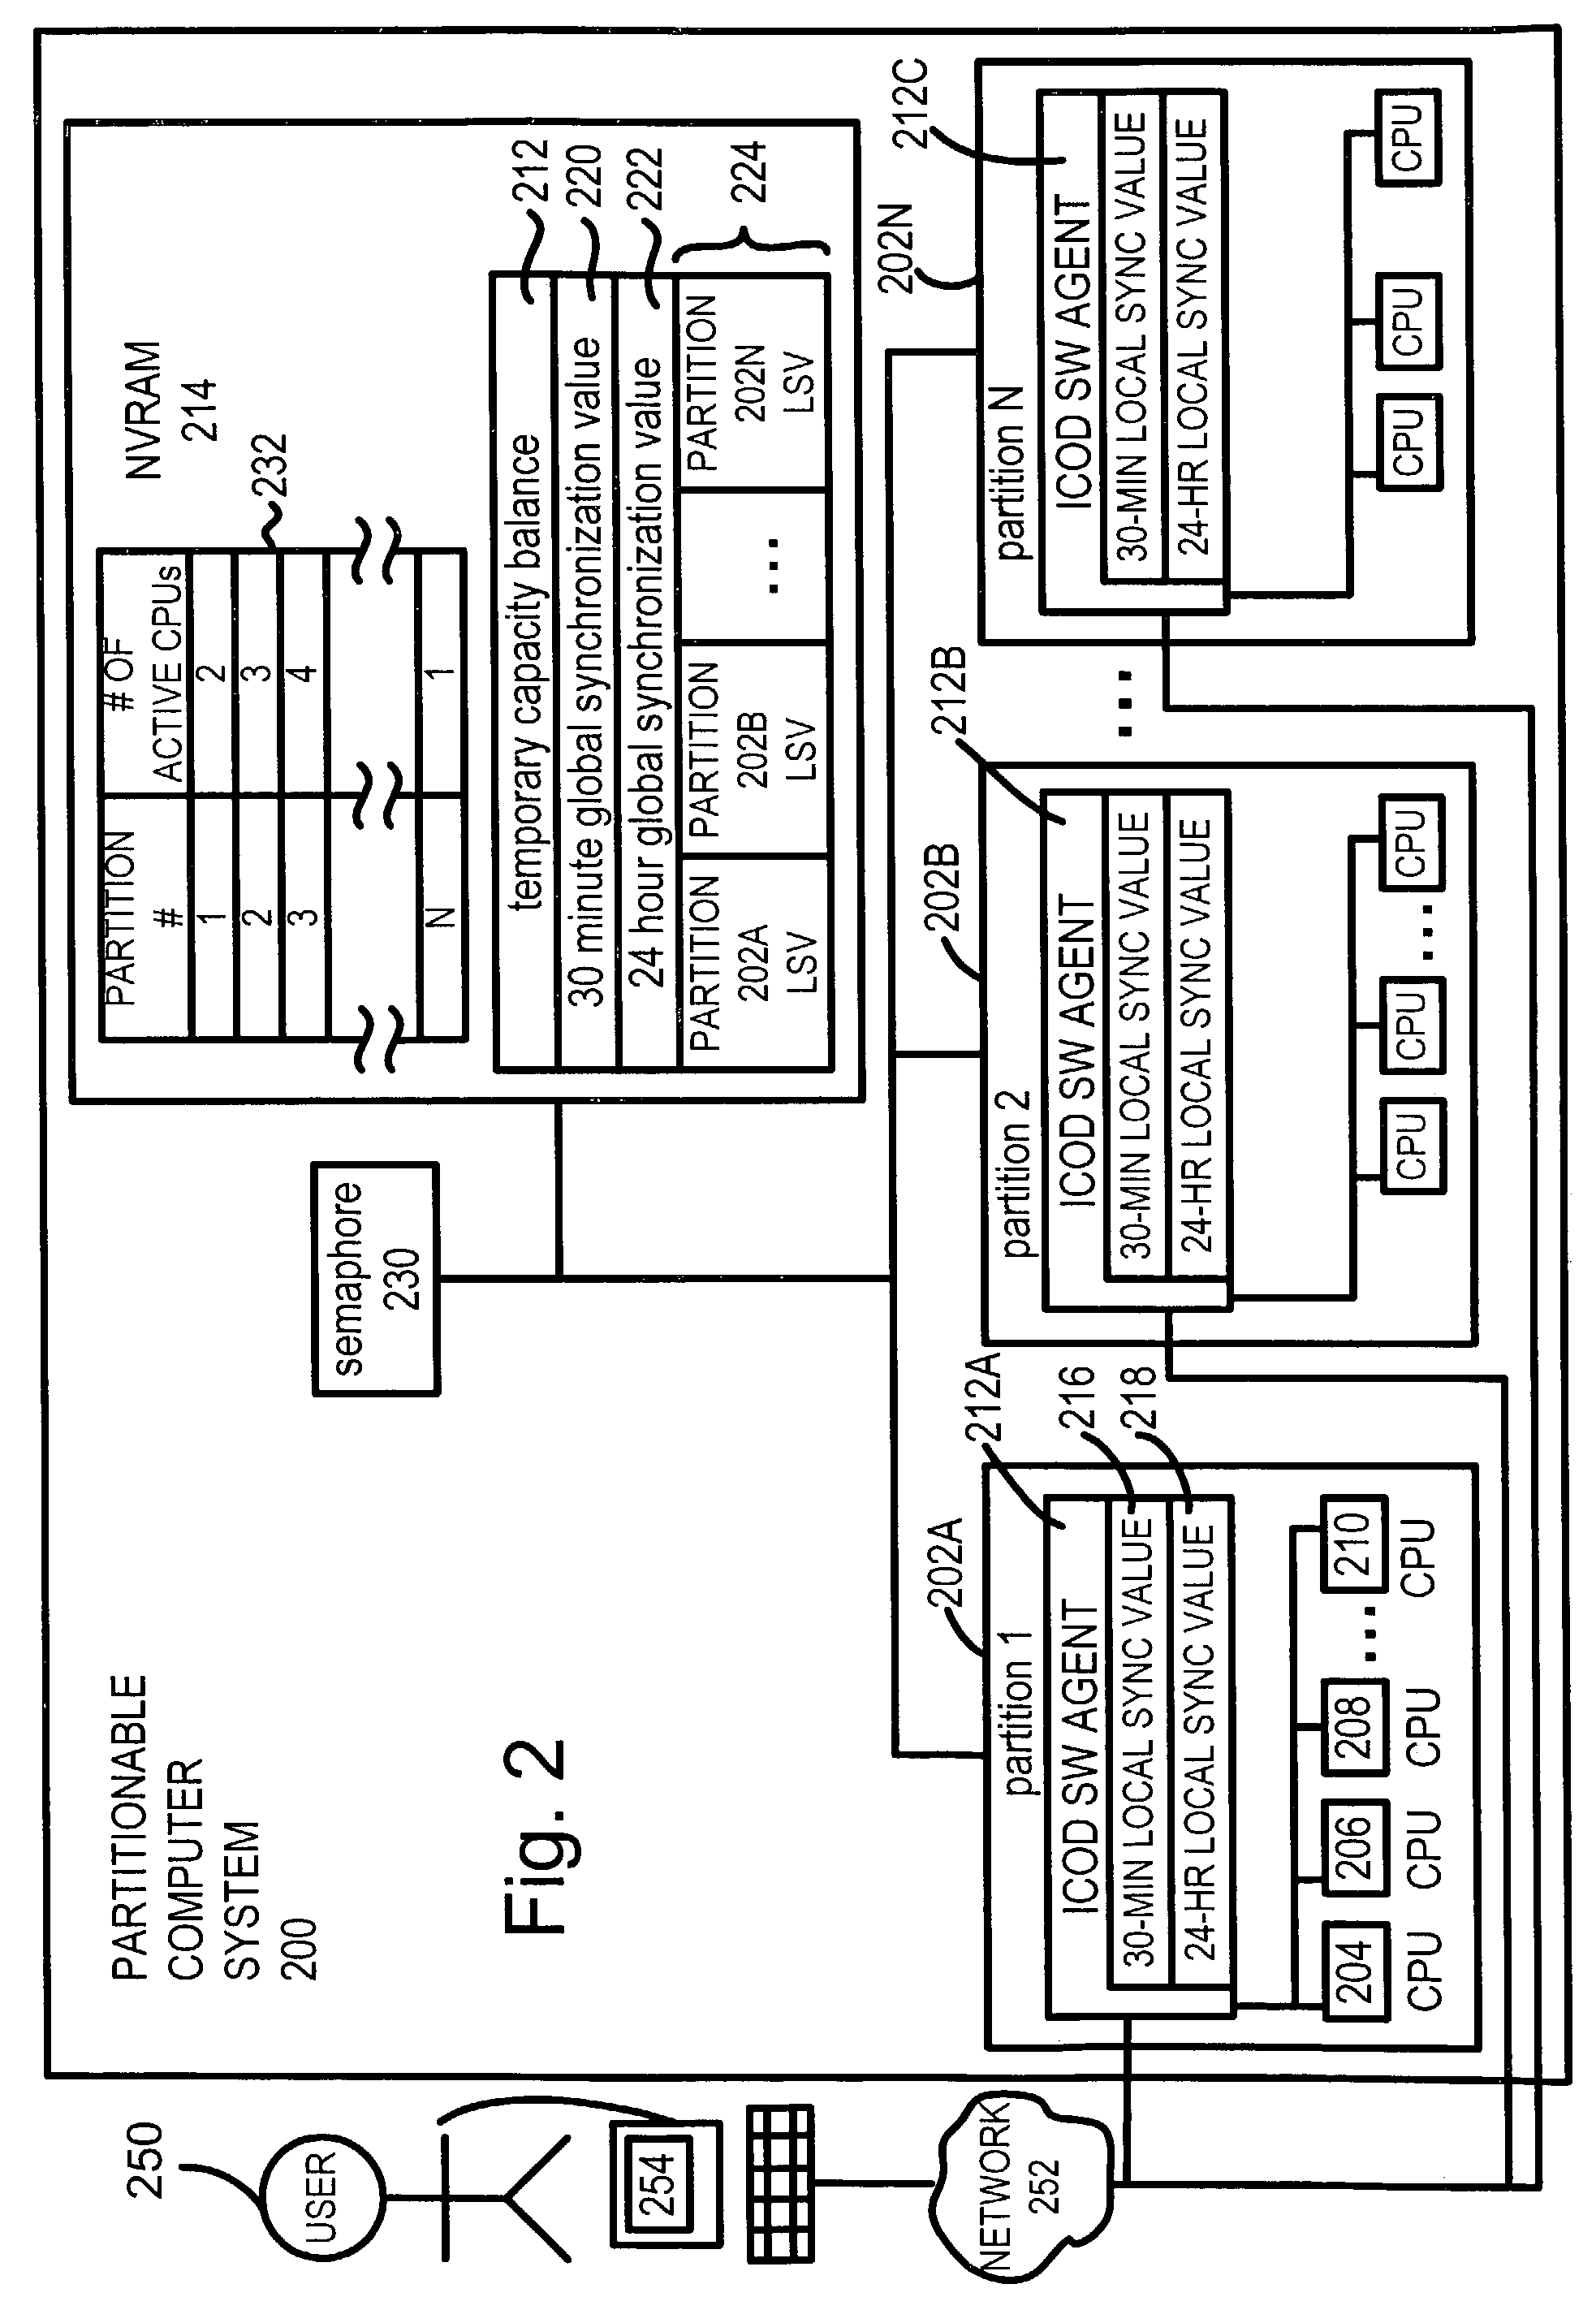 Methods and apparatus for managing the execution of a task among a plurality of autonomous processes